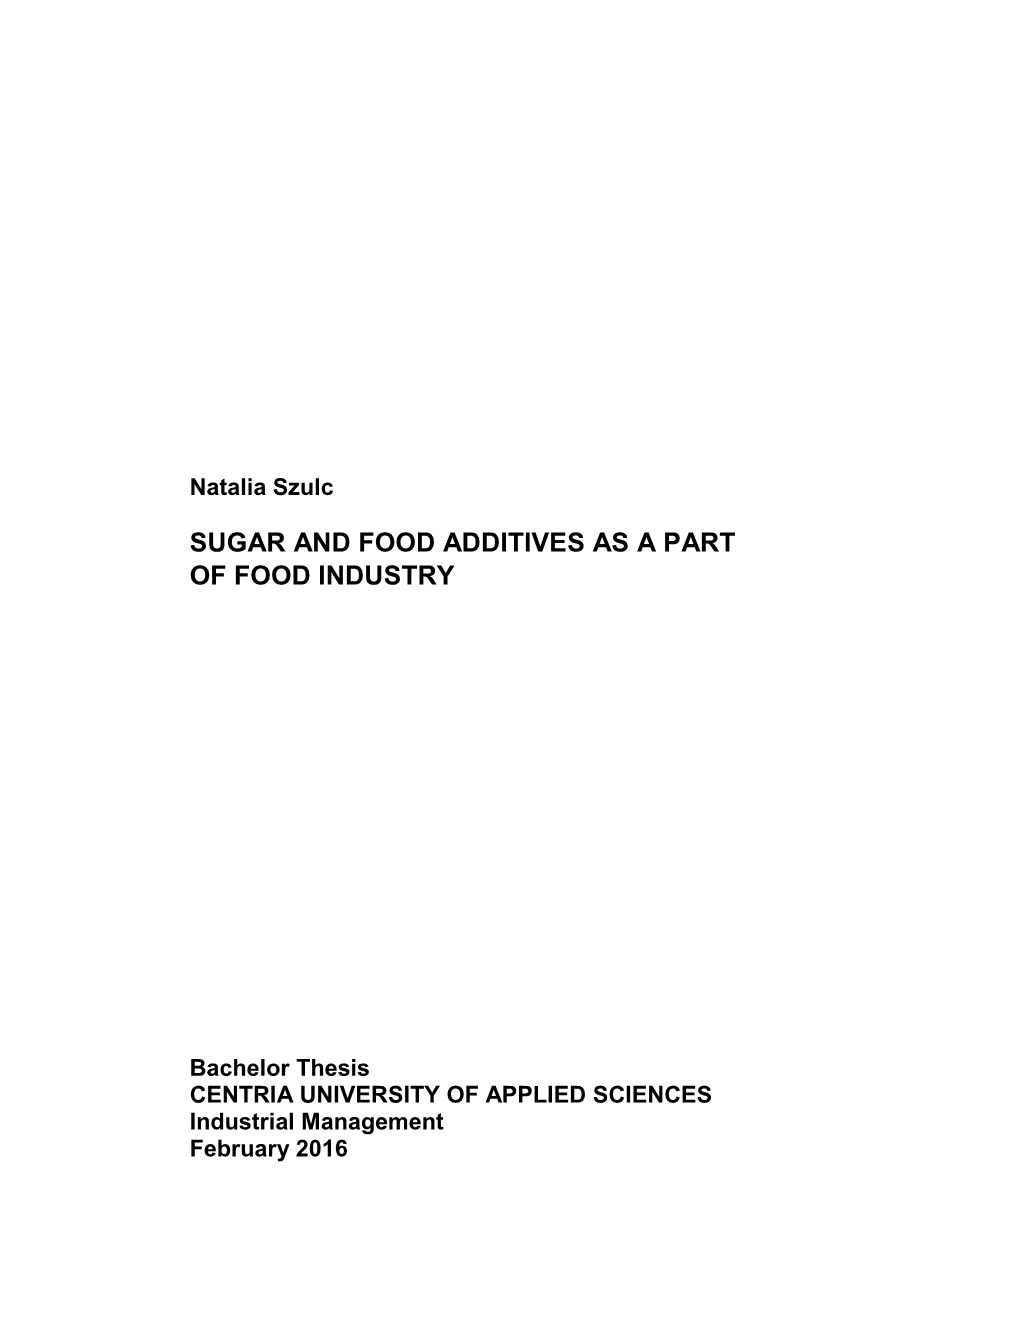 Sugar and Food Additives As a Part of Food Industry